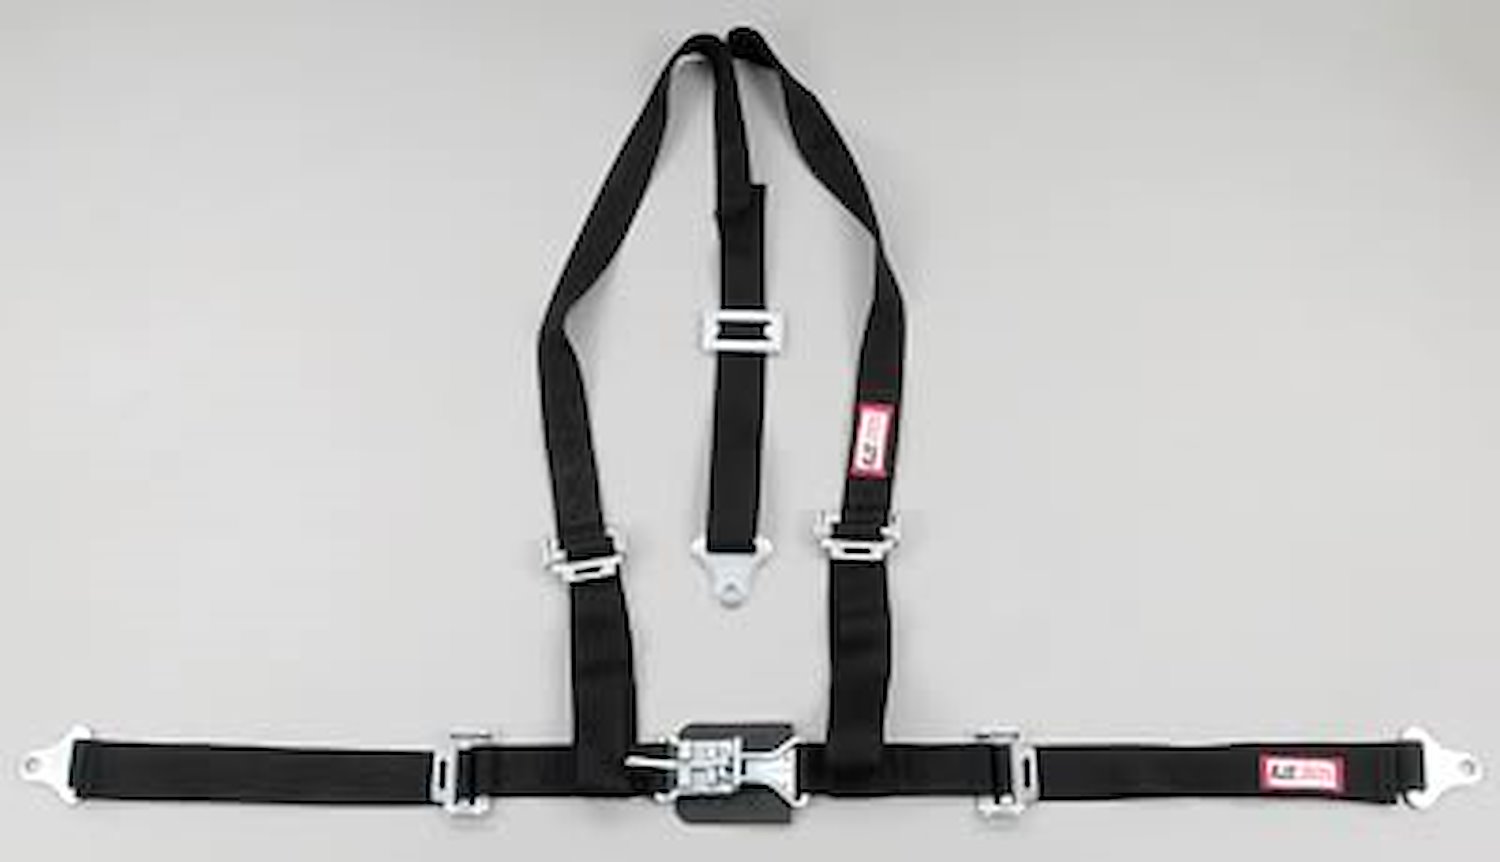 NON-SFI L&L HARNESS 2 PULL DOWN Lap Belt SNAP SEWN IN 2 S.H. Y FLOOR Mount WRAP/SNAP YELLOW